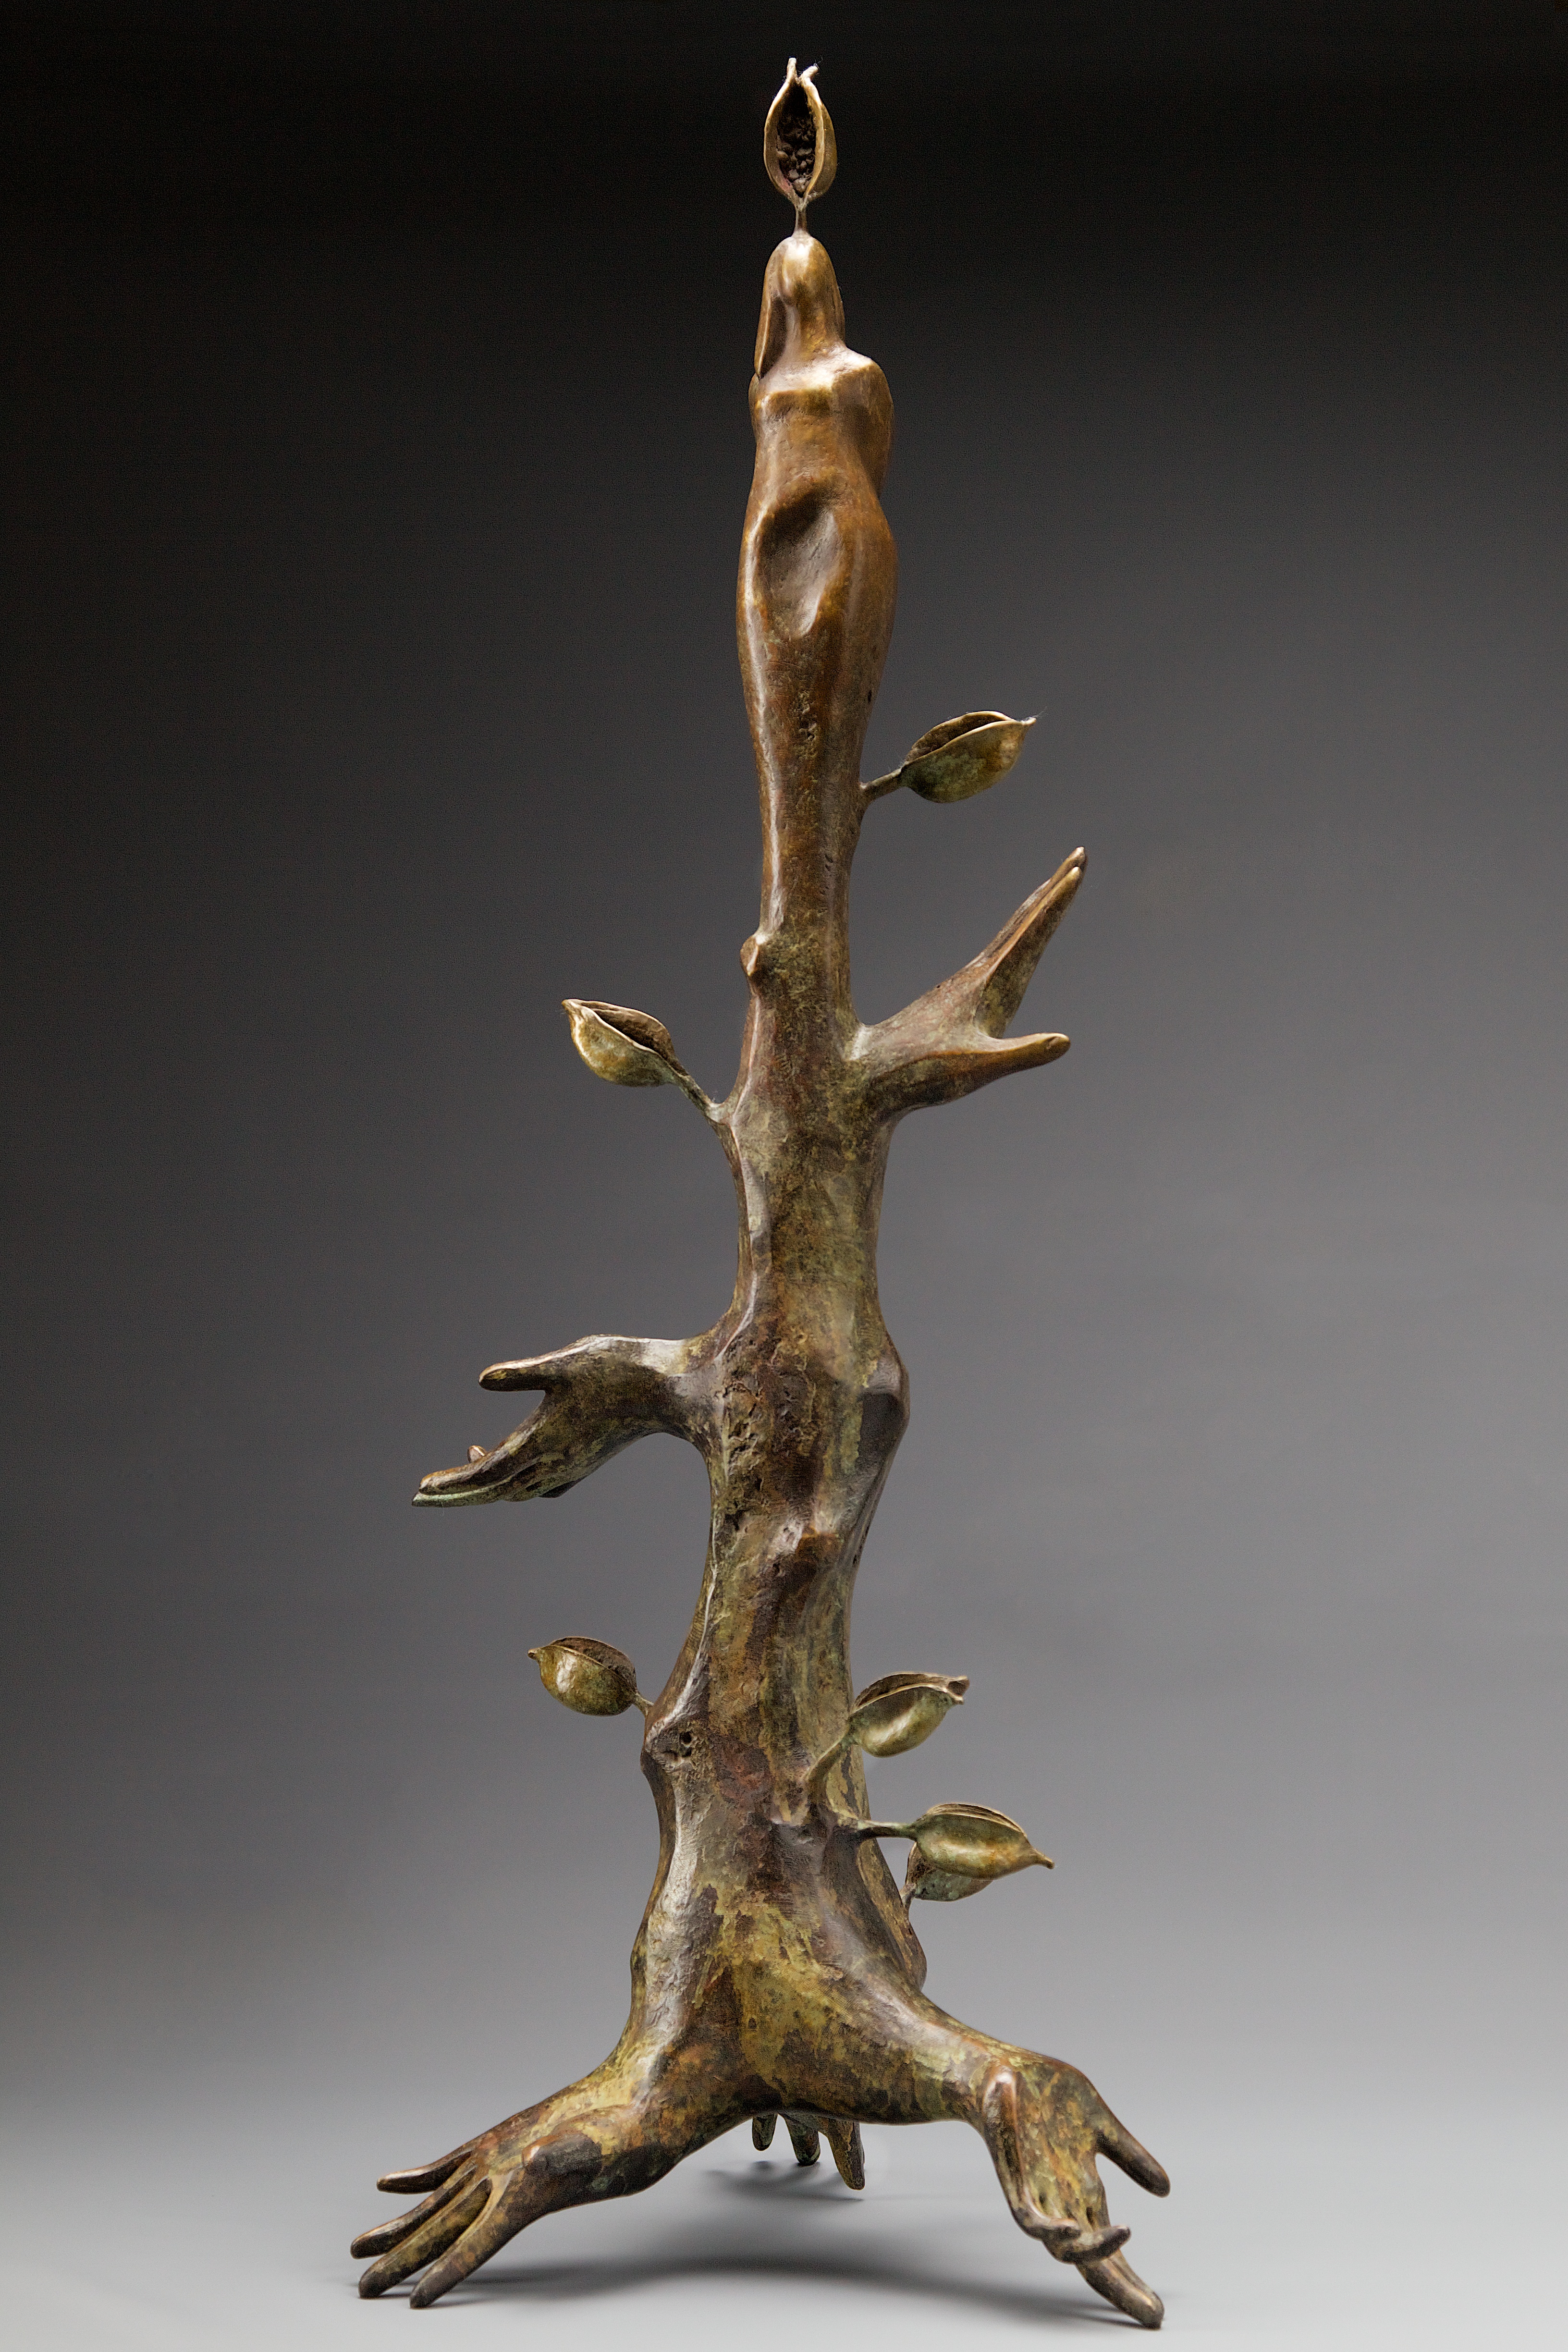 <b>roots and all</b>37 x 14 x 14 inches, bronze, <em>edition of 12</em>